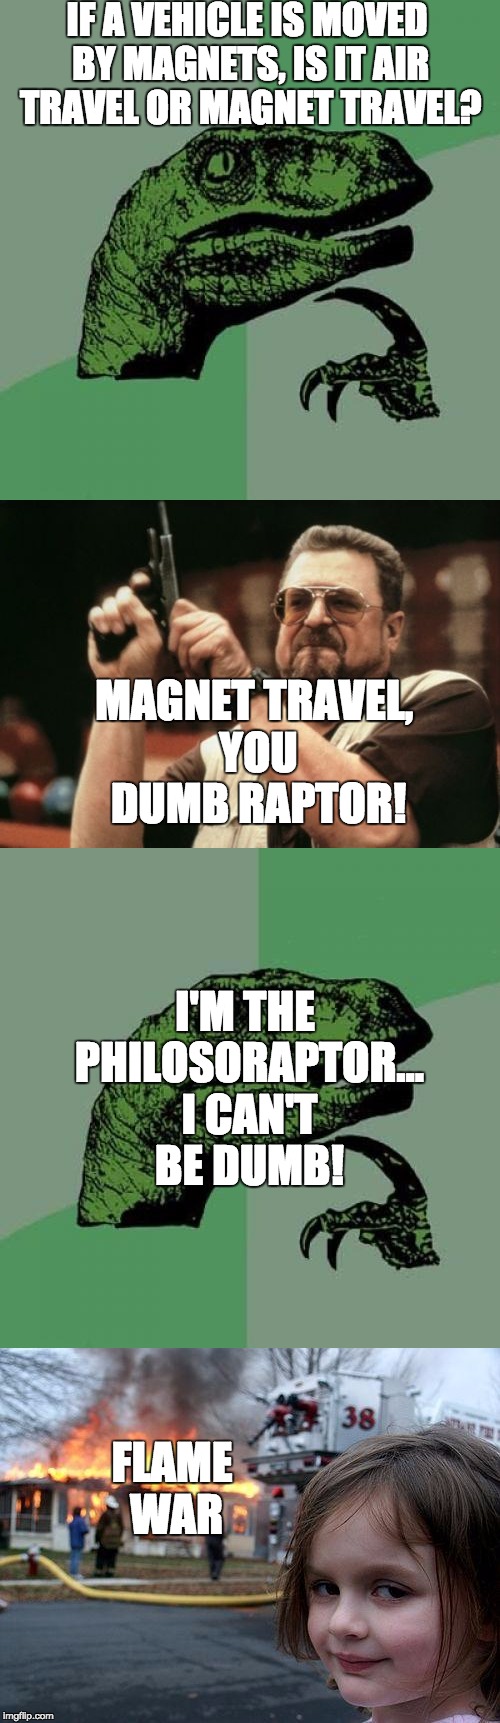 Easy come, difficult go! | IF A VEHICLE IS MOVED BY MAGNETS, IS IT AIR TRAVEL OR MAGNET TRAVEL? MAGNET TRAVEL, YOU DUMB RAPTOR! I'M THE PHILOSORAPTOR... I CAN'T BE DUMB! FLAME WAR | image tagged in flame war,disaster girl,am i the only one around here,philosoraptor | made w/ Imgflip meme maker